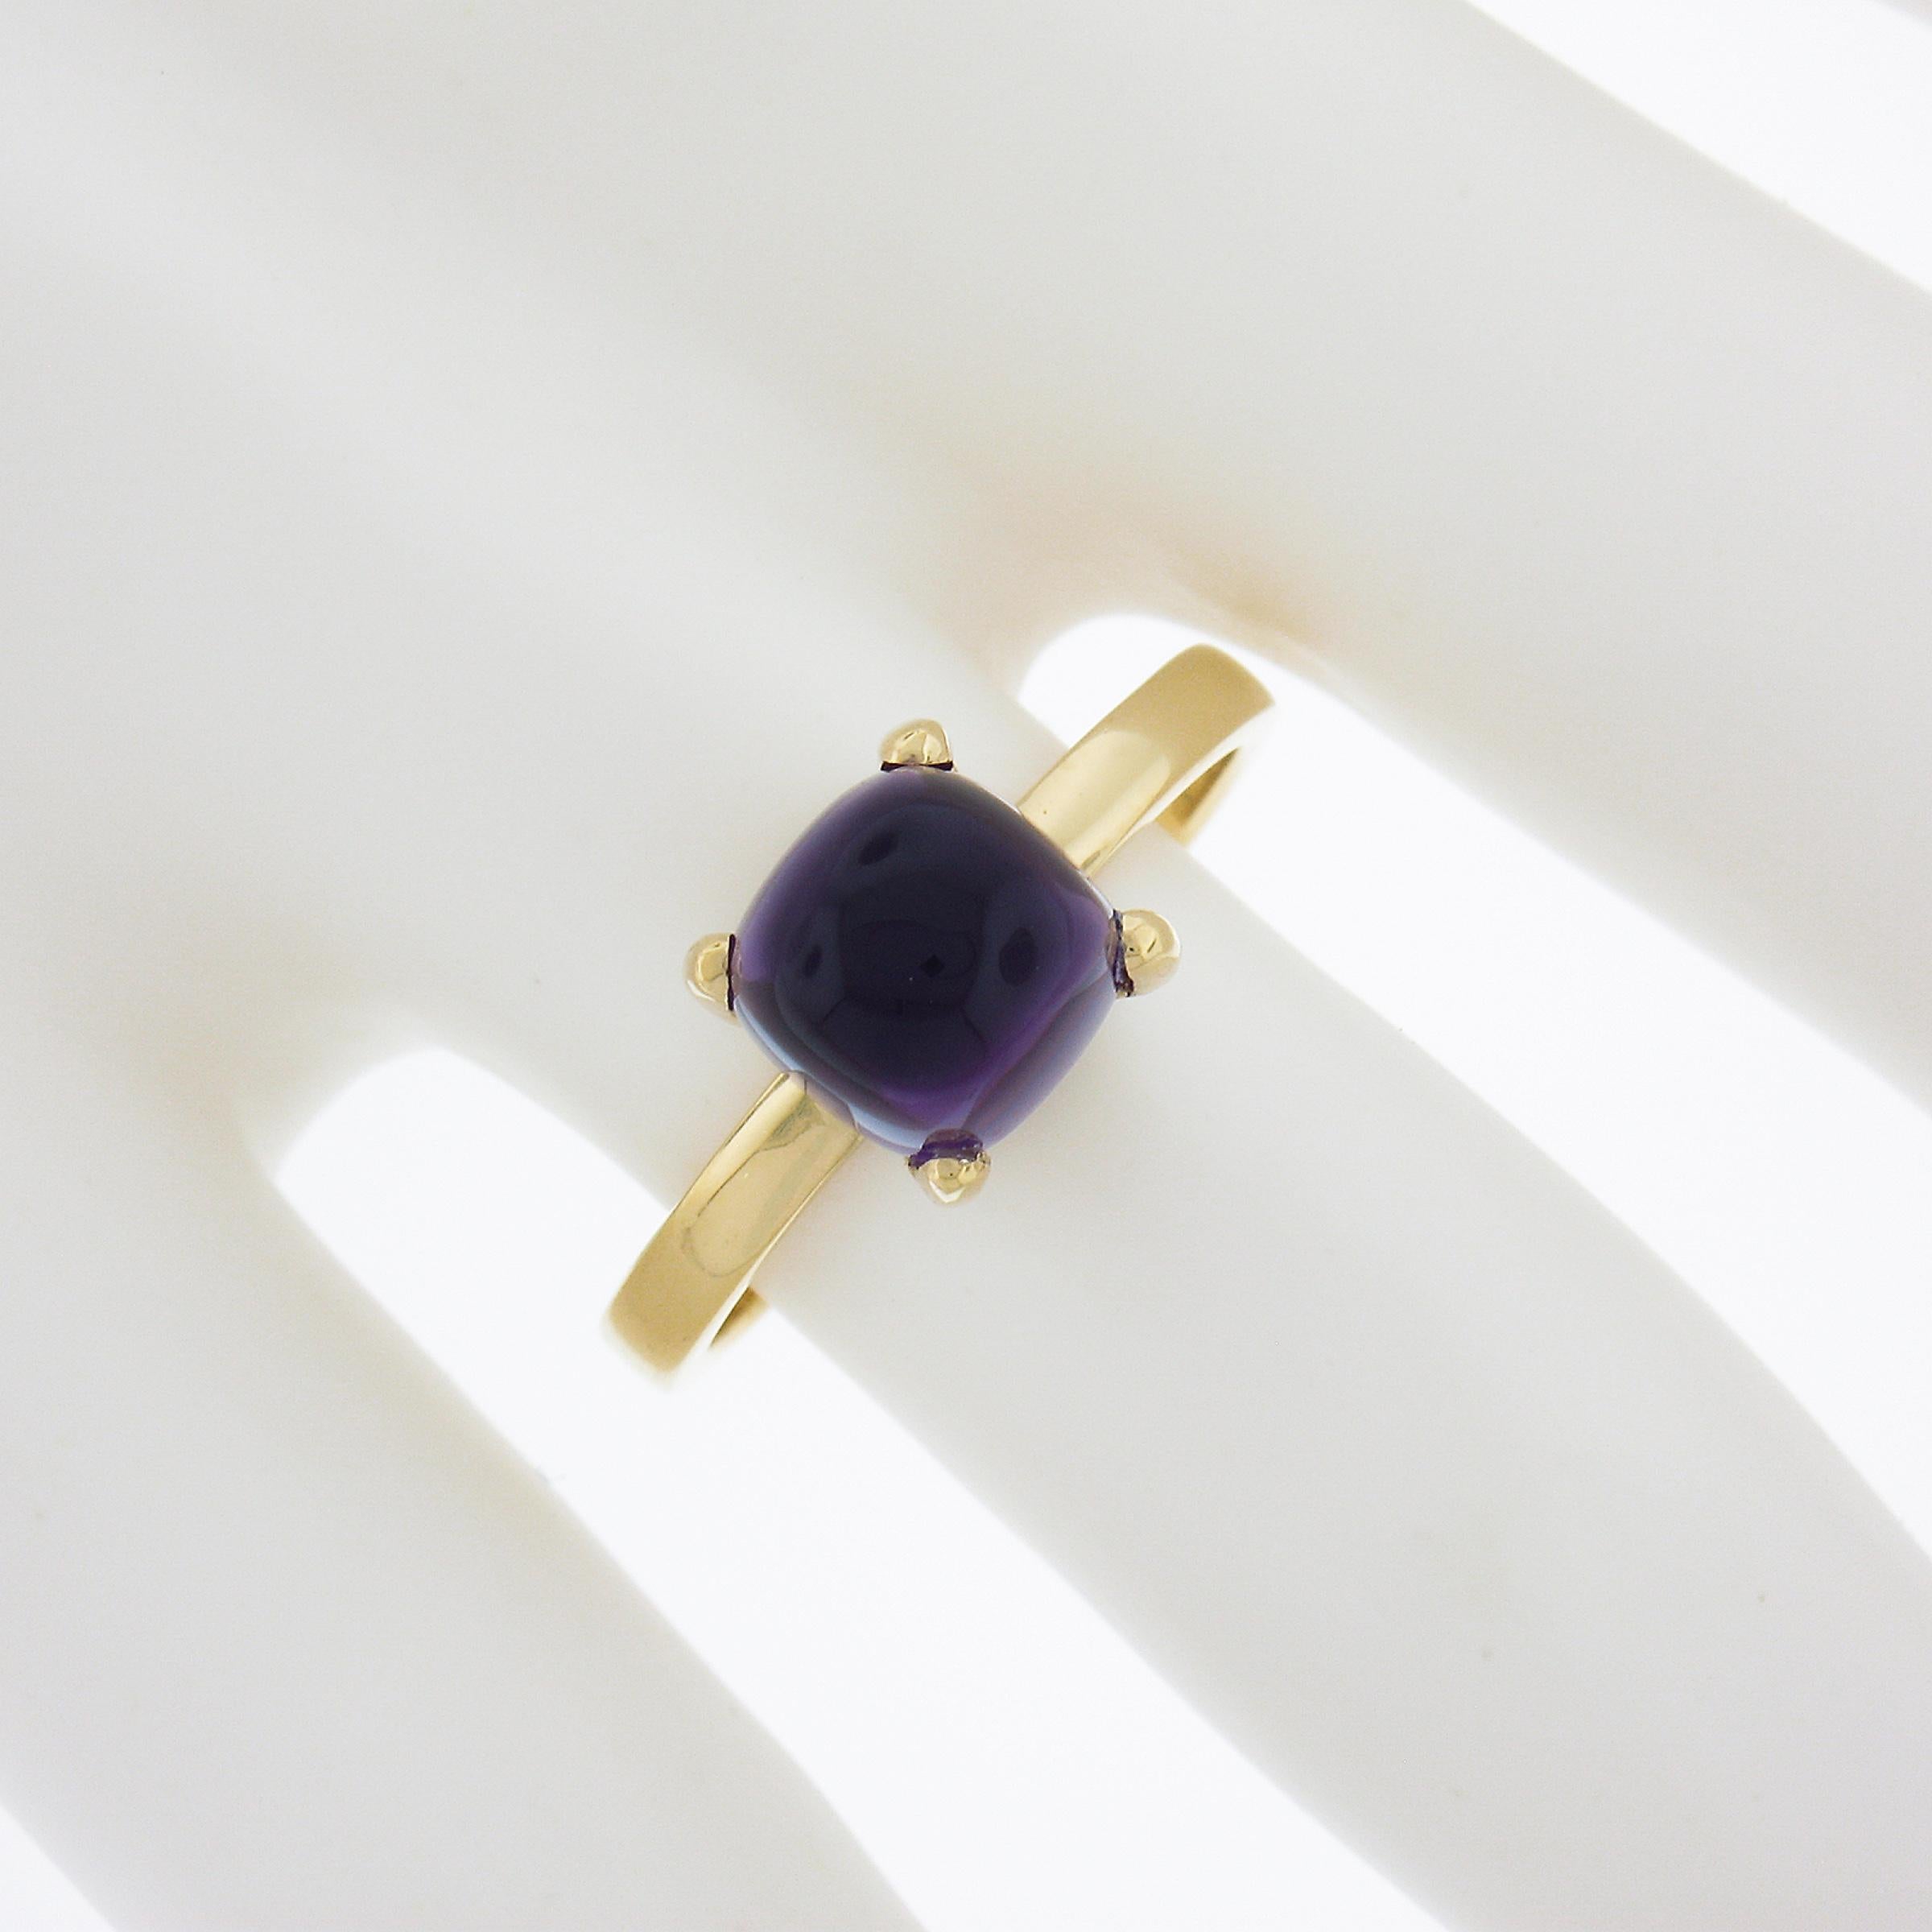 Women's Tiffany & Co. 18k Gold Sugarloaf Cabochon Cut Amethyst Solitaire Cocktail Ring